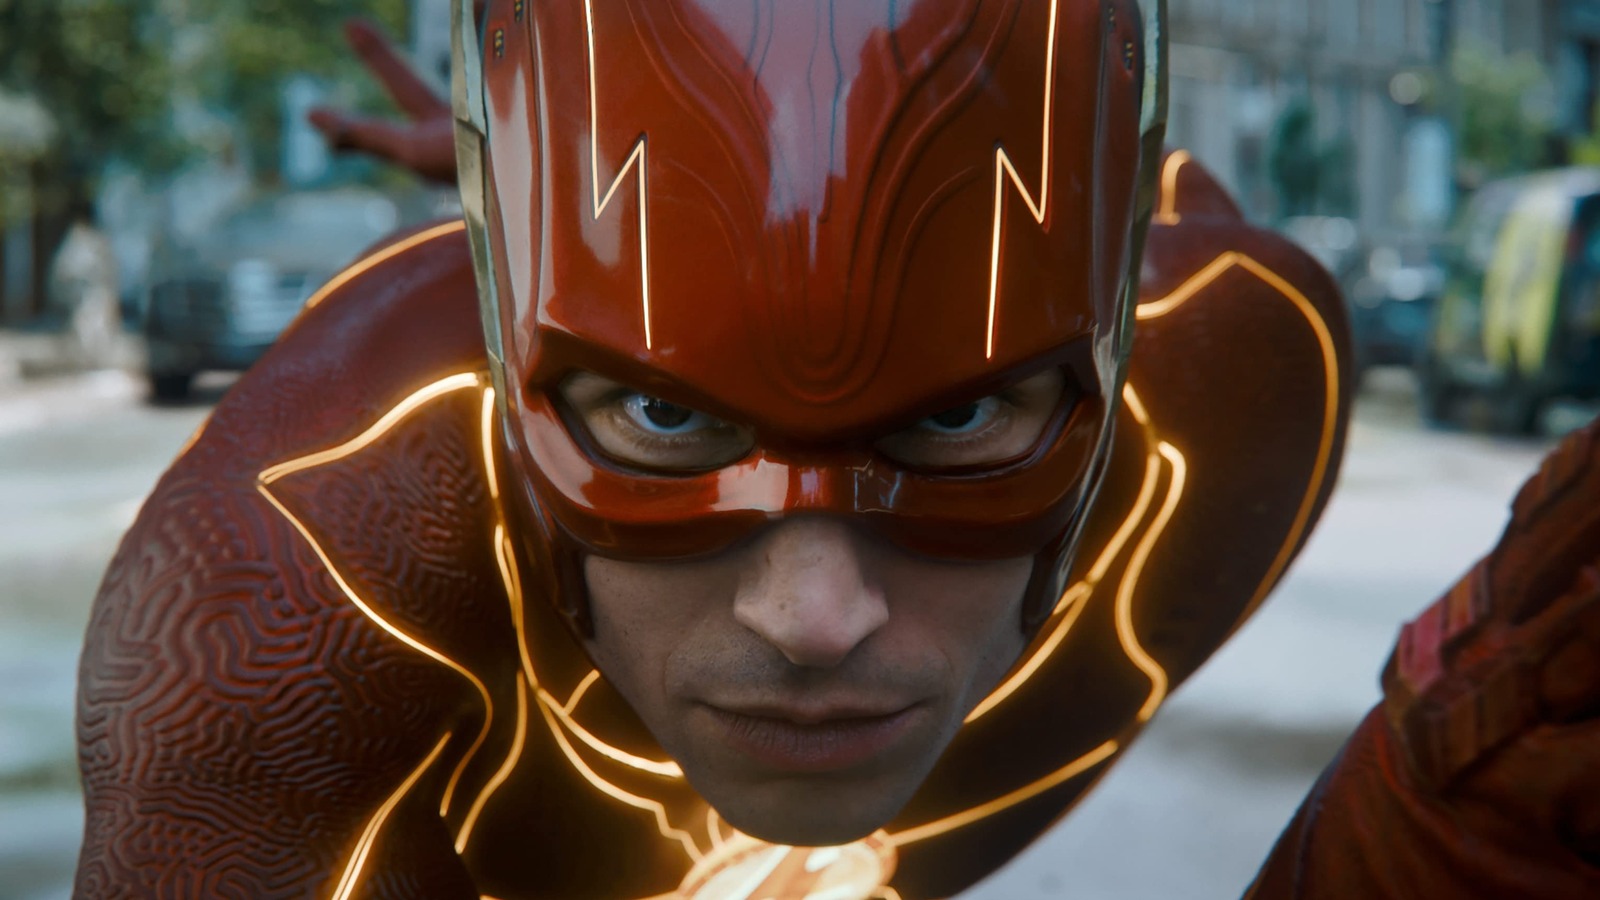 The Flash director says star Ezra Miller won’t be recast in a possible sequel